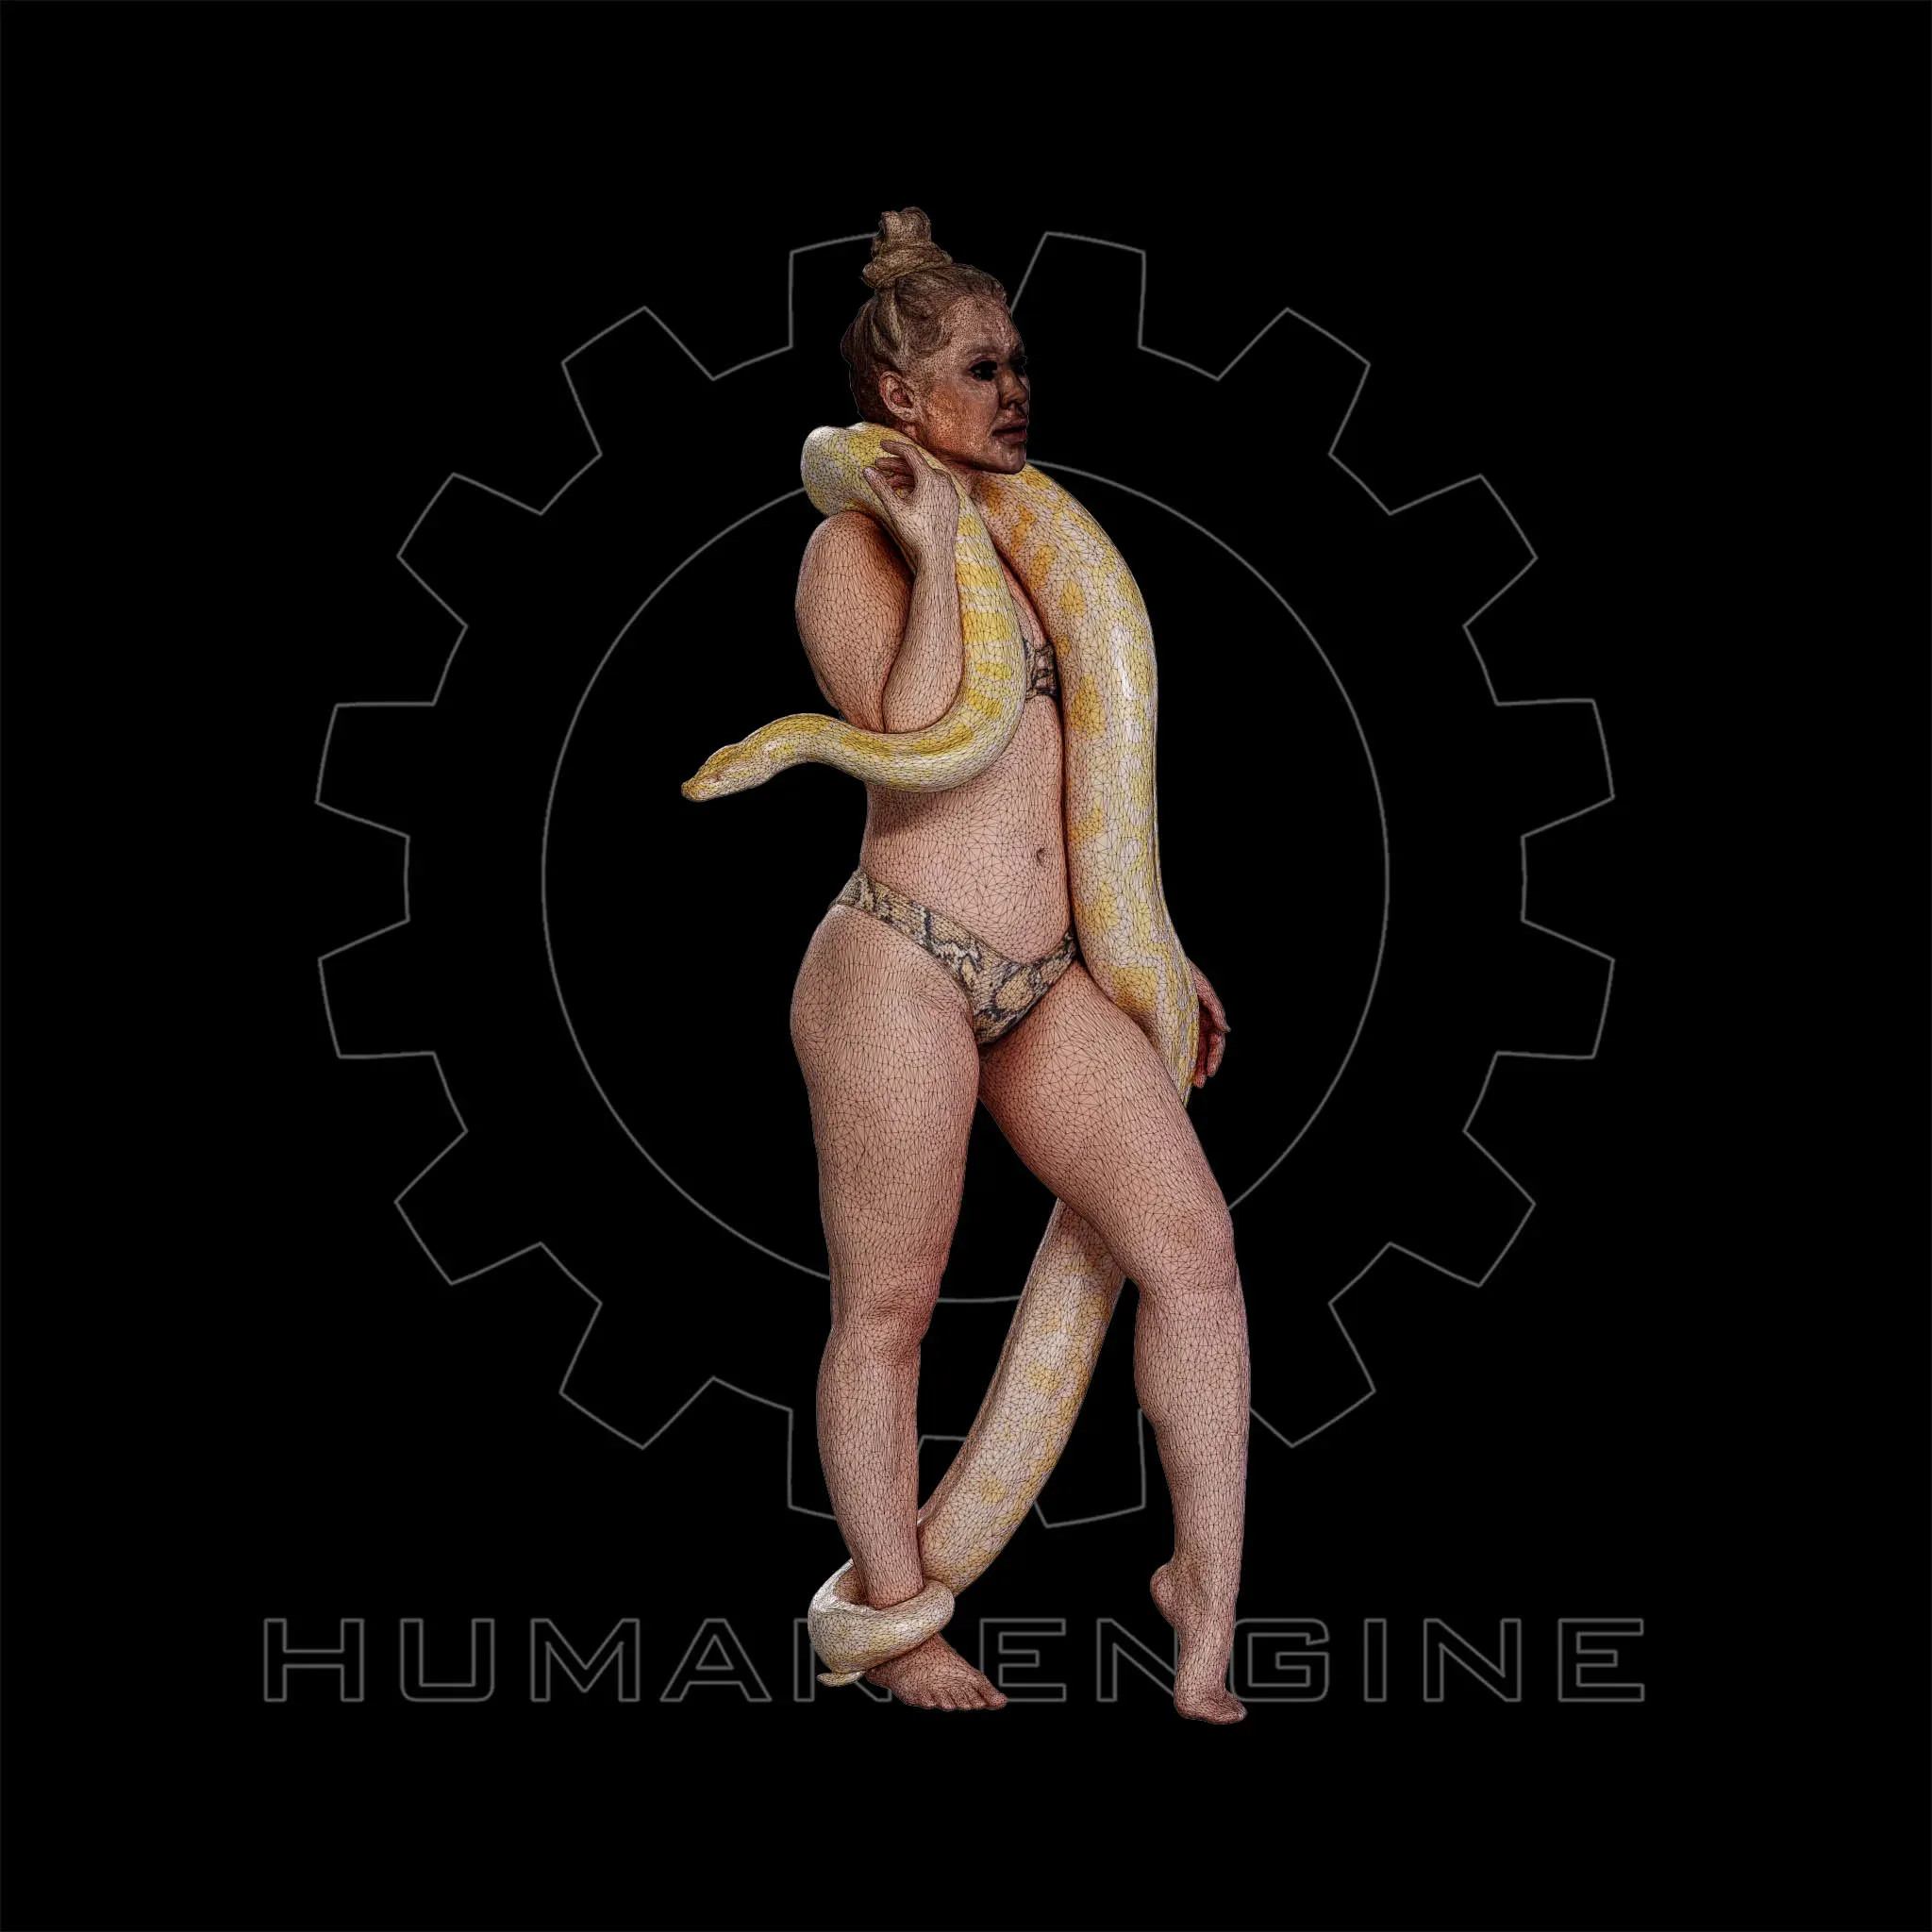 Female Scan - Woman Holding a Snake 51